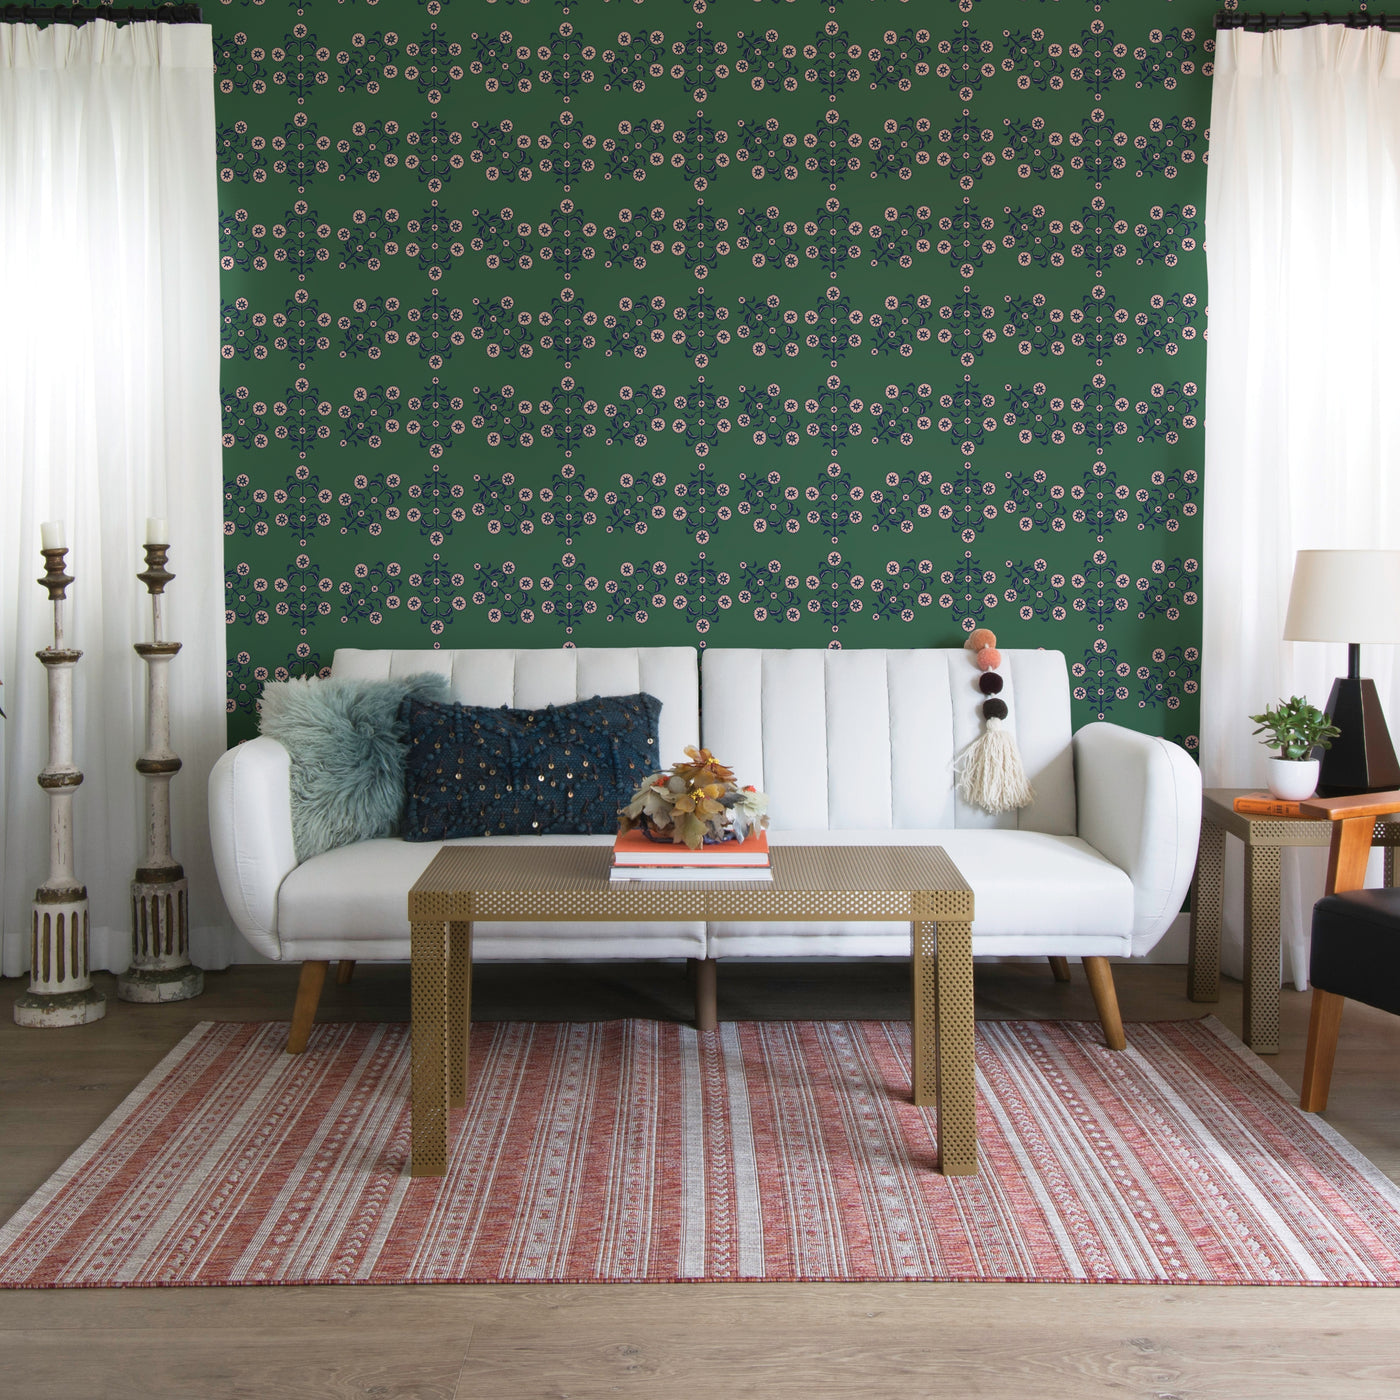 Block Print Floral WALLPAPER in green displayed in a living room behind a couch.